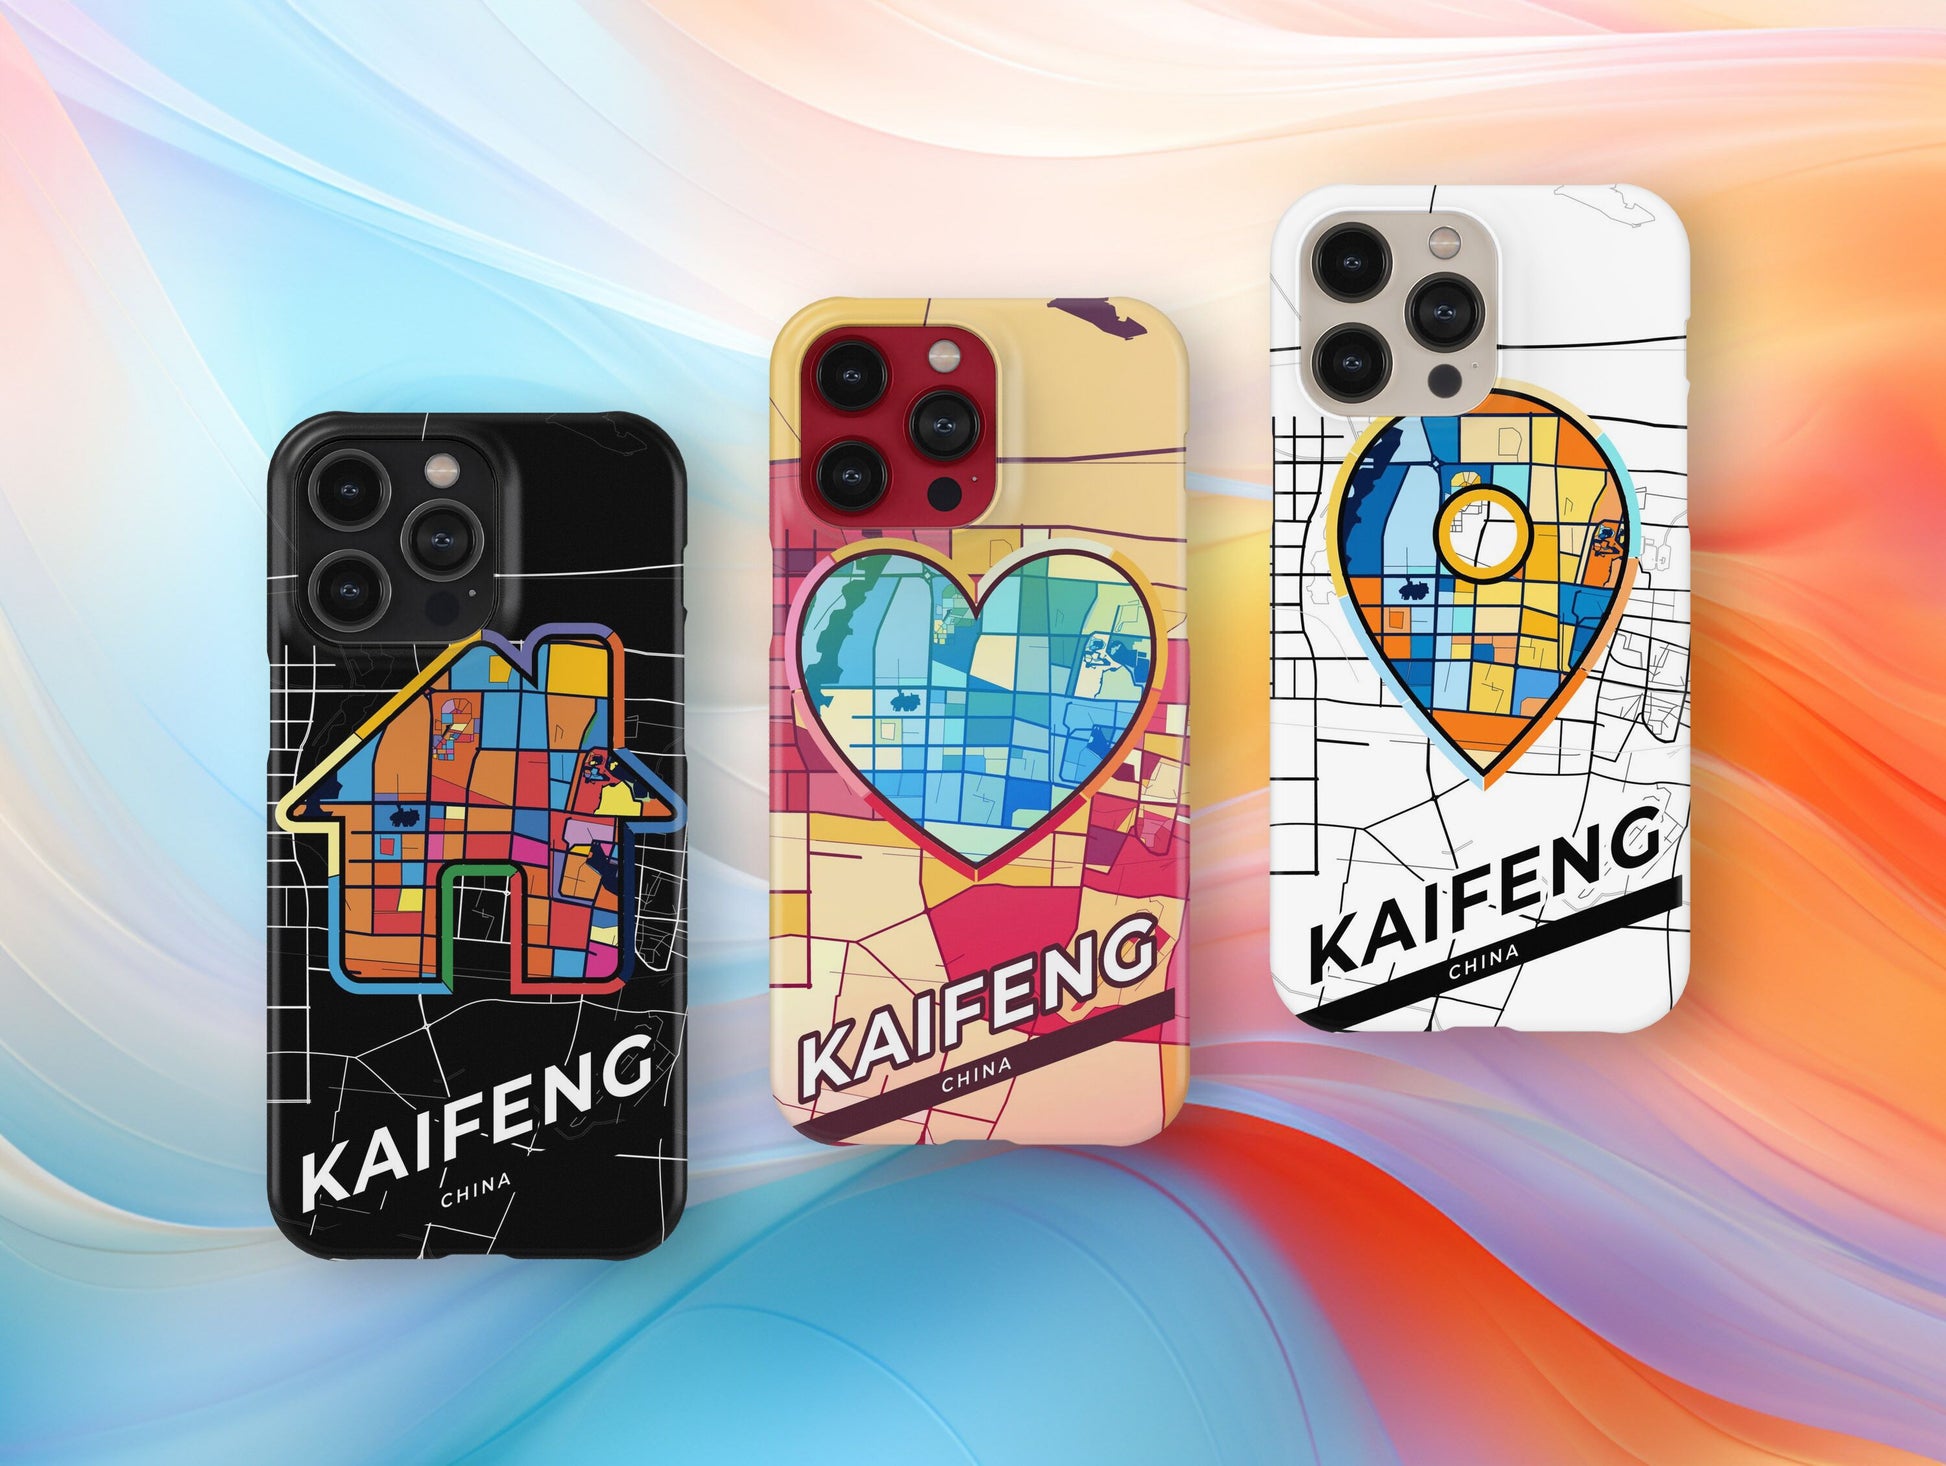 Kaifeng China slim phone case with colorful icon. Birthday, wedding or housewarming gift. Couple match cases.